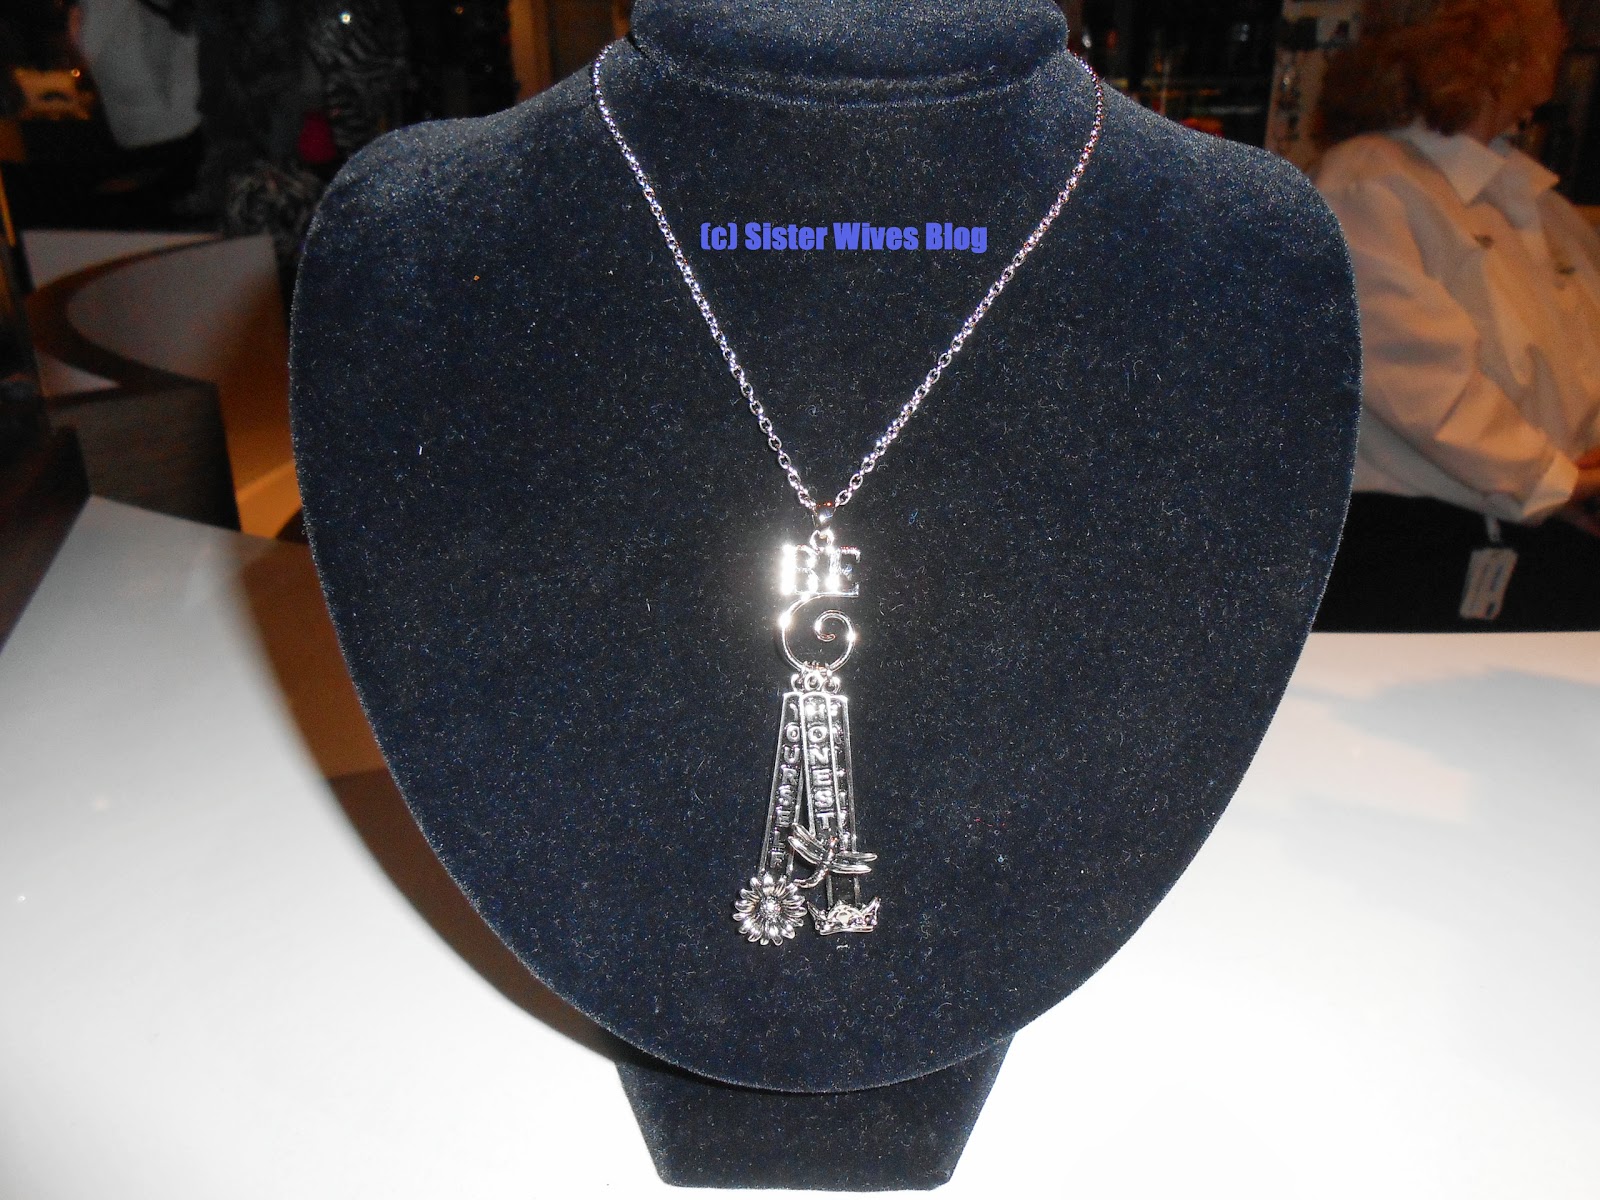 Sister Wives Blog: Exclusive! My Sisterwife's Jewelry at Pictures, Report! MSWC Jewelry, SWB